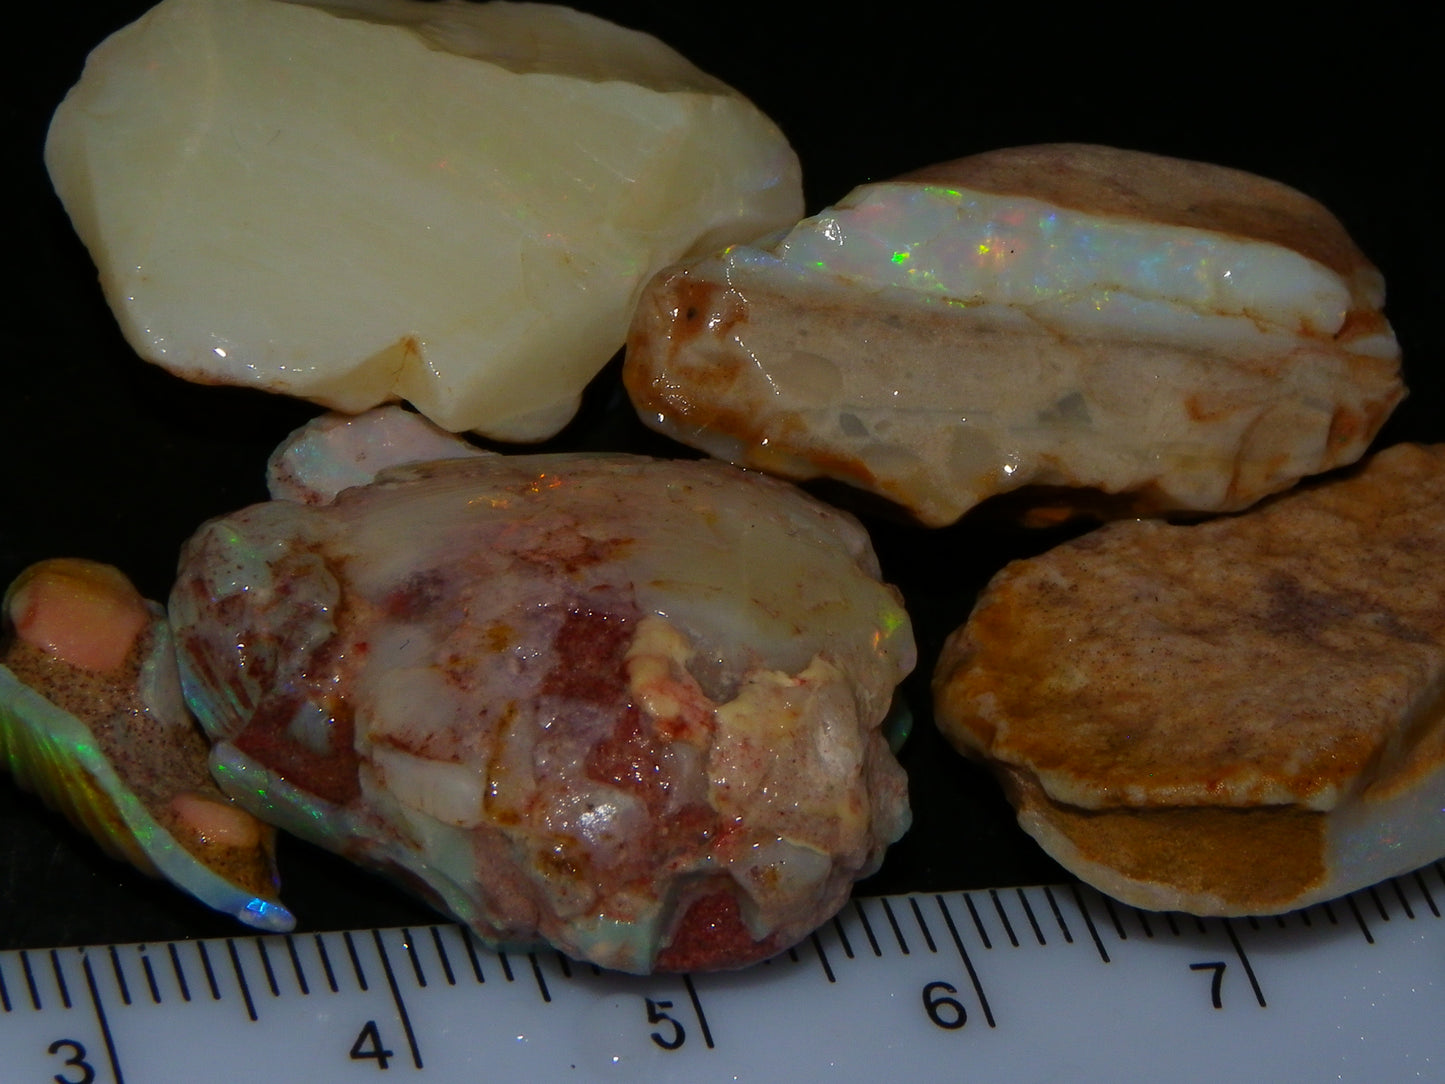 Nice Coober Pedy Shell Fossil Opal Specimens/Rough 110cts Fires/Bars :)